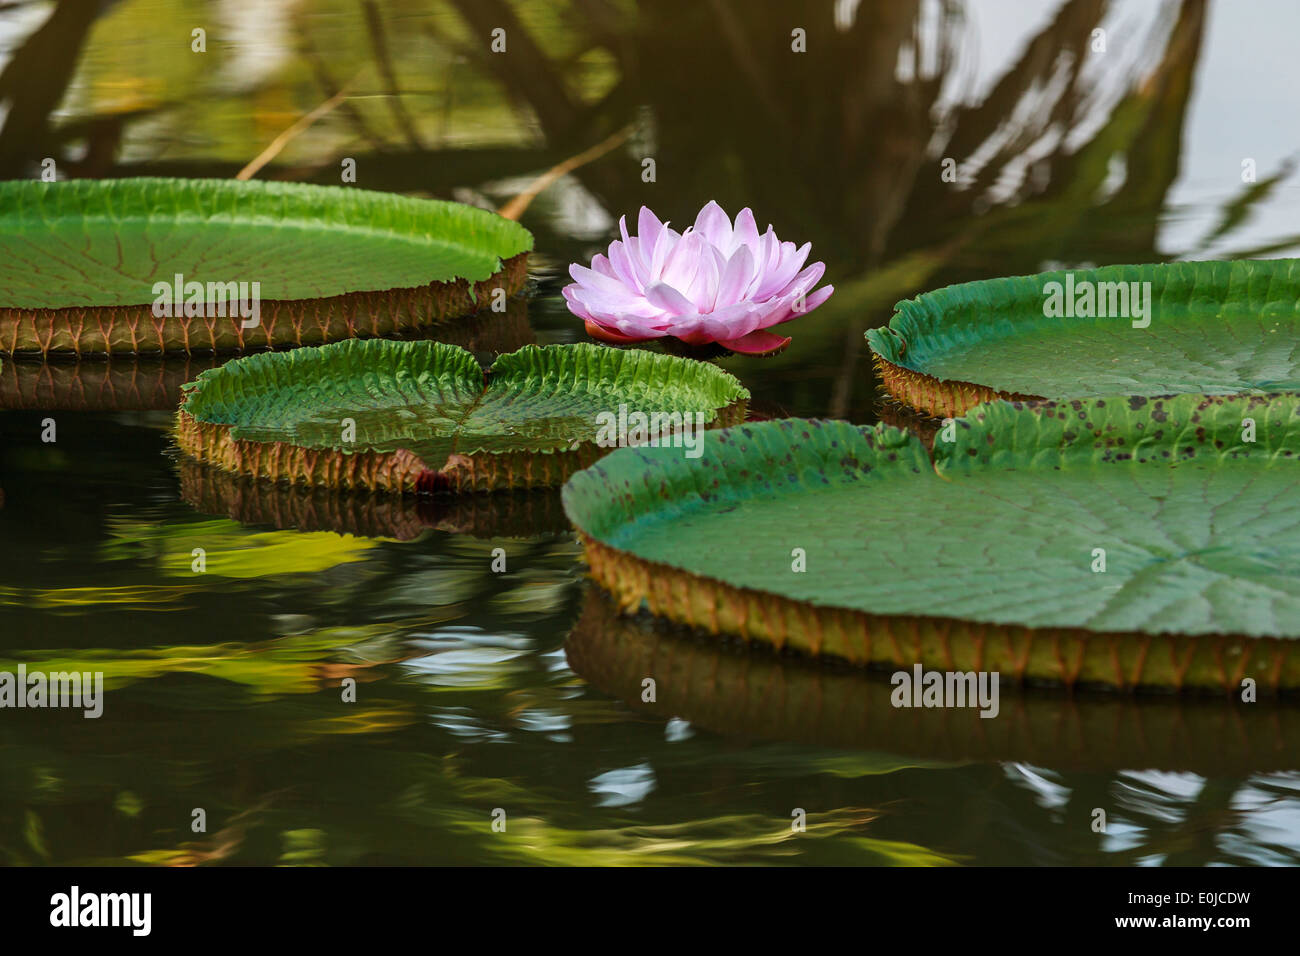 Lotus Water Lily floating on pond Stock Photo